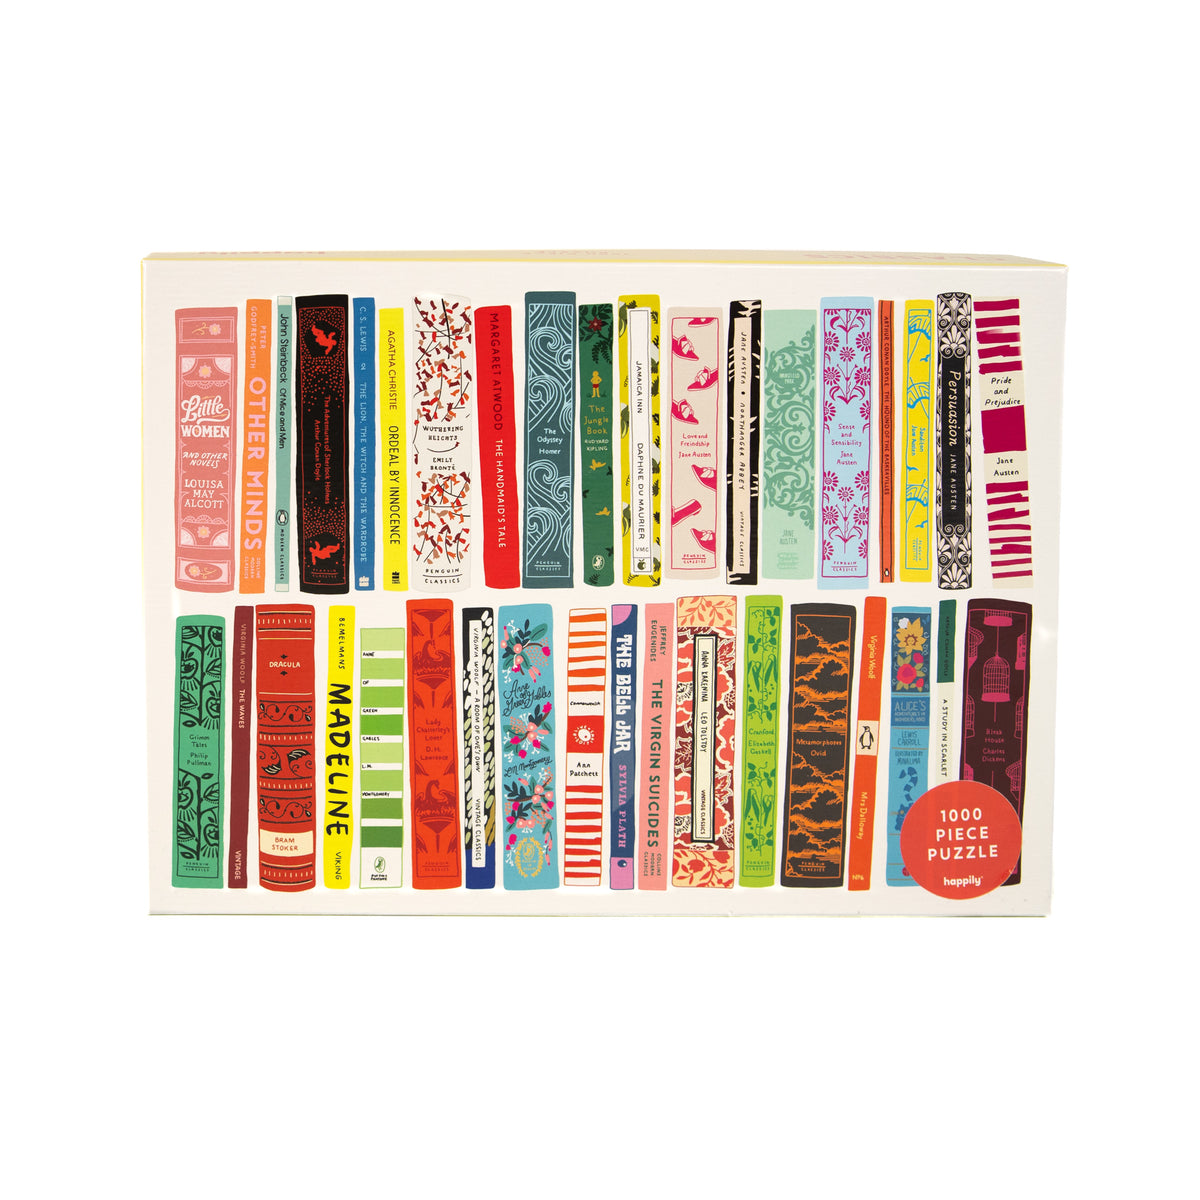 Book spine jigsaw puzzle